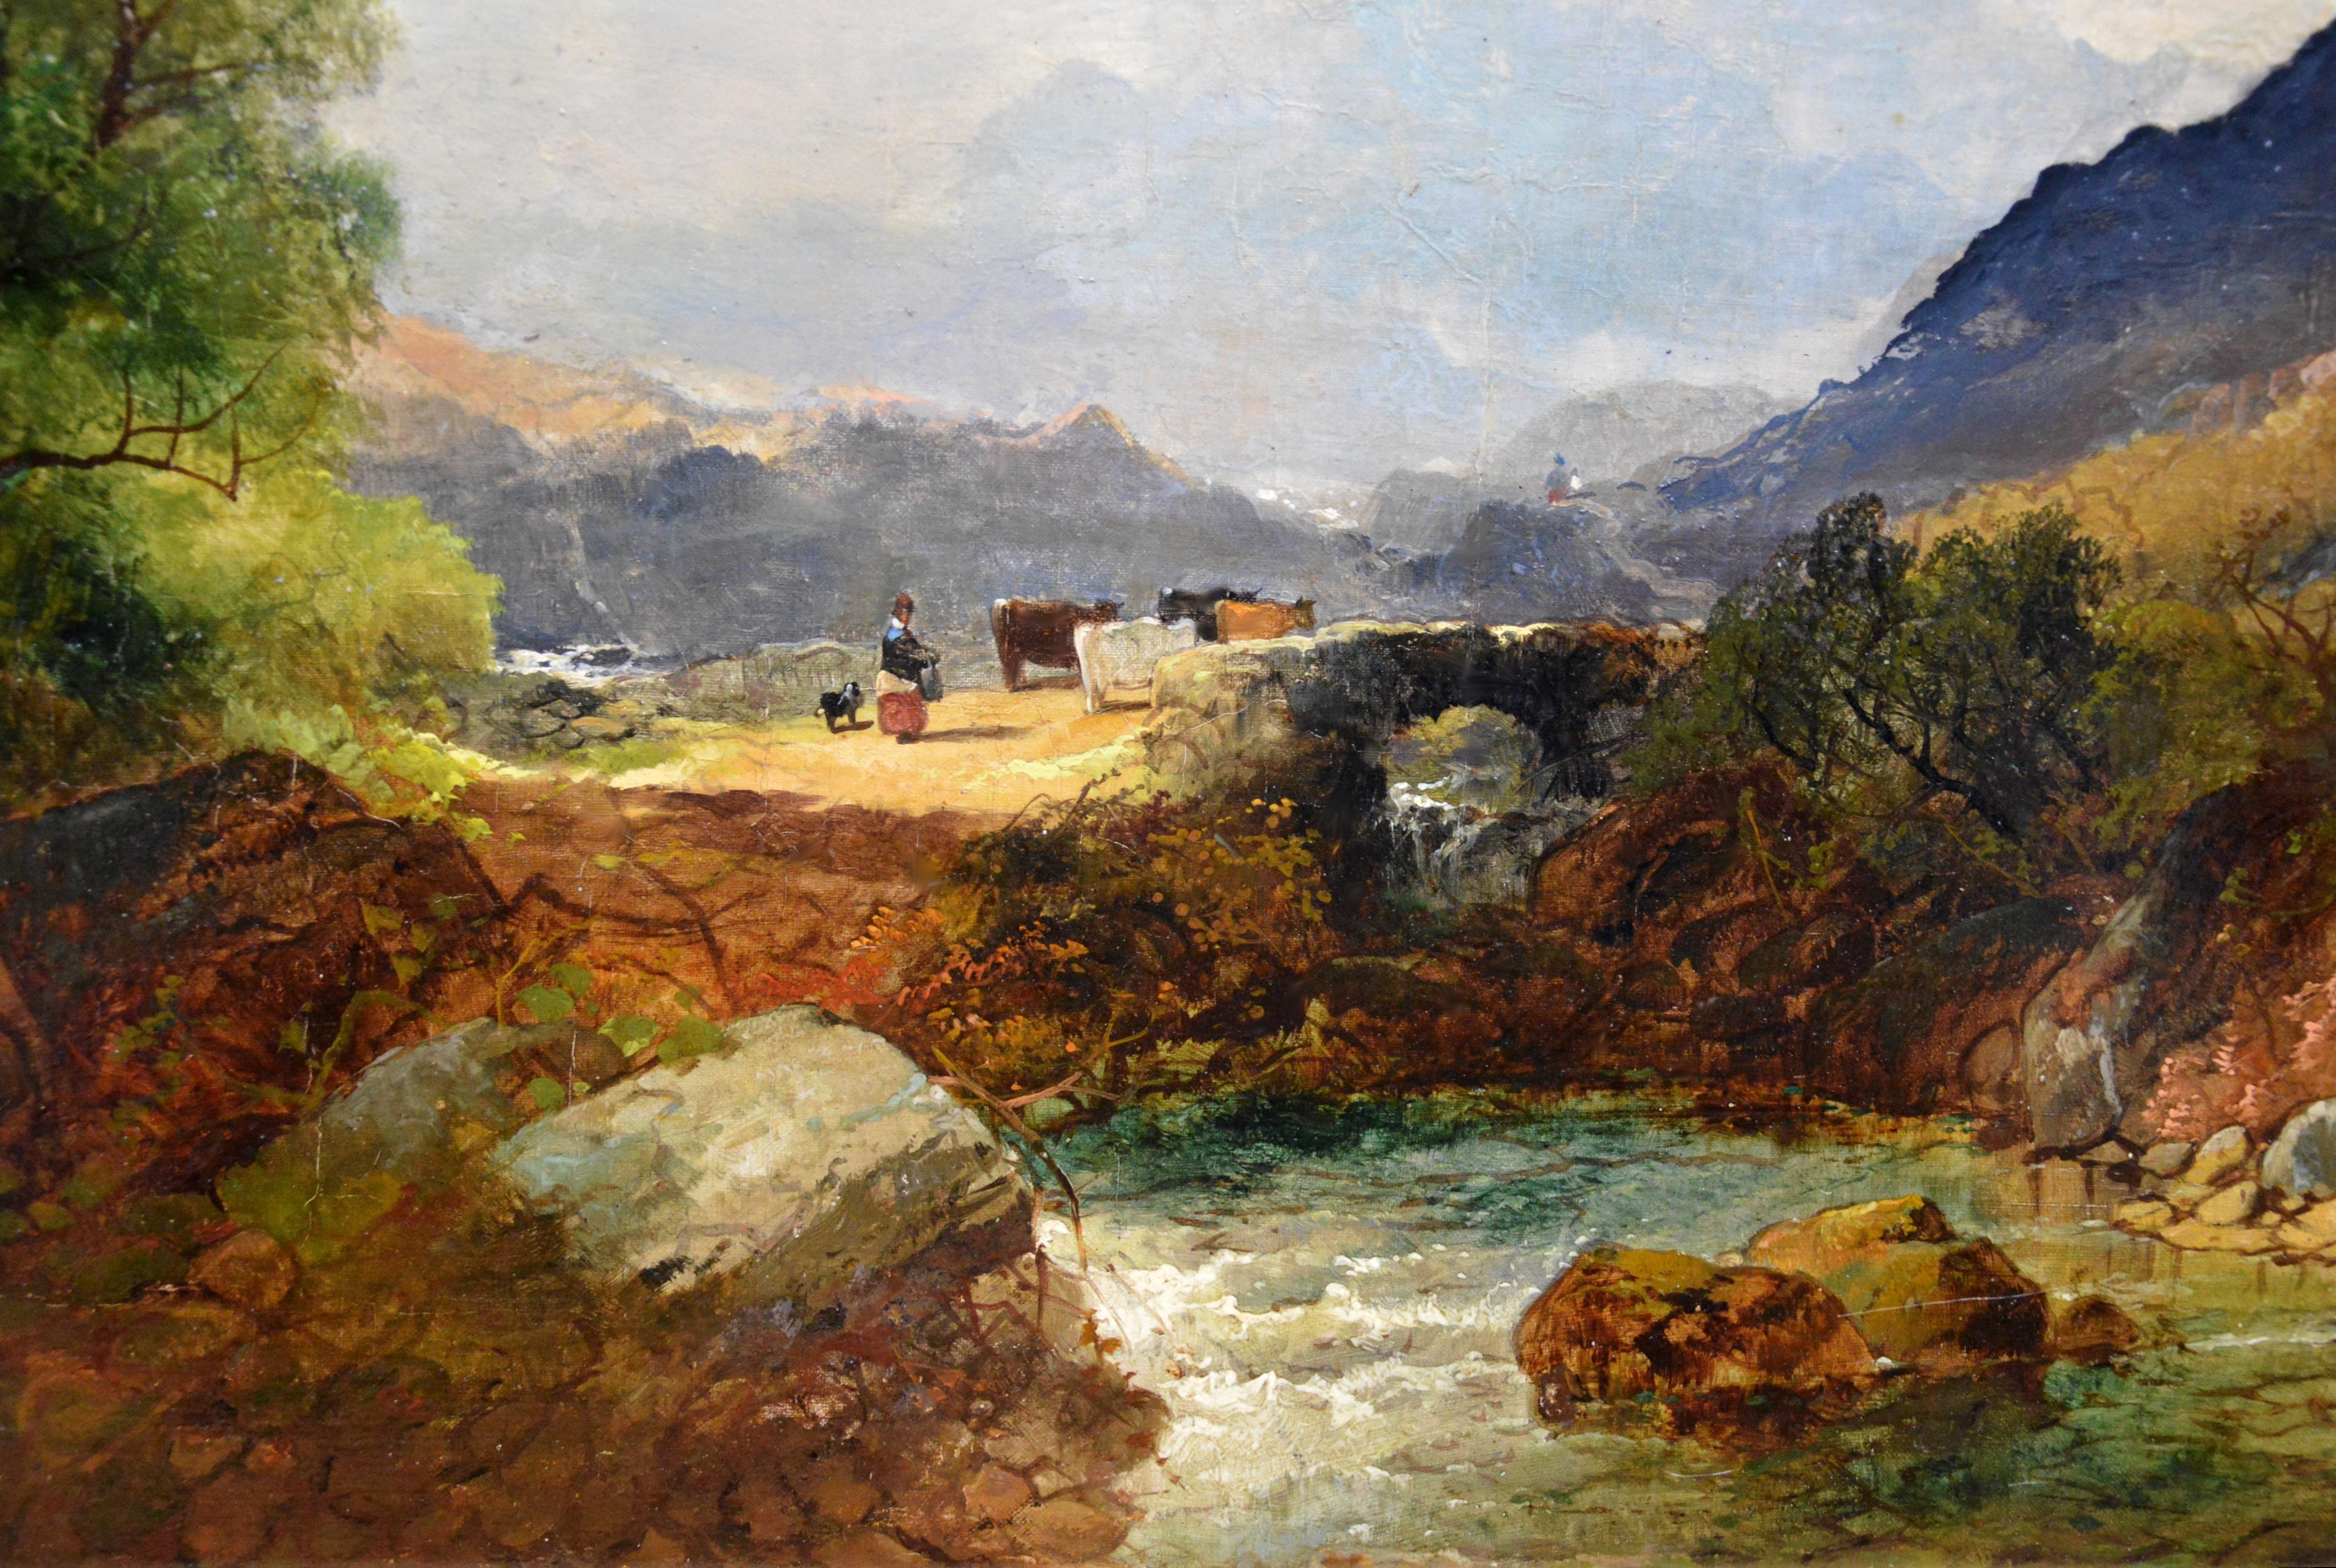 Snowdon, North Wales - Very Large 19th Century Oil Painting - Mount Snowdon 3